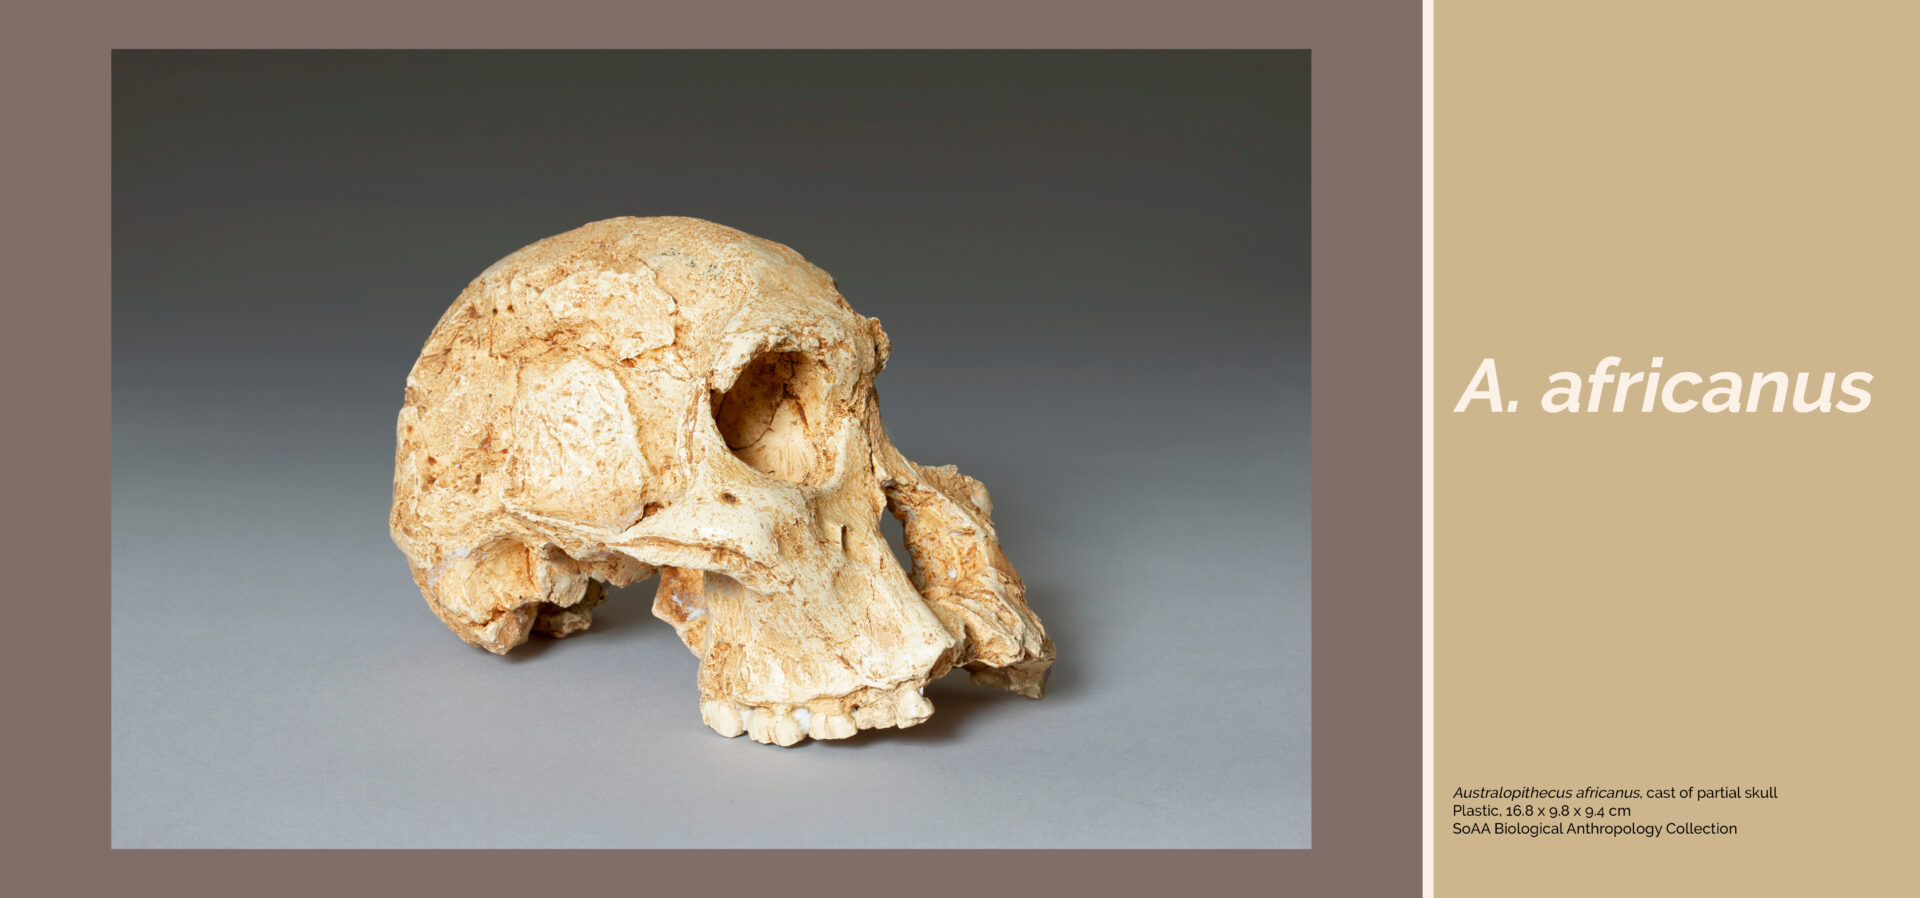 Photograph of a mottled, cream coloured cast of a cranium which is sitting on an angle on a grey background. Caption: "